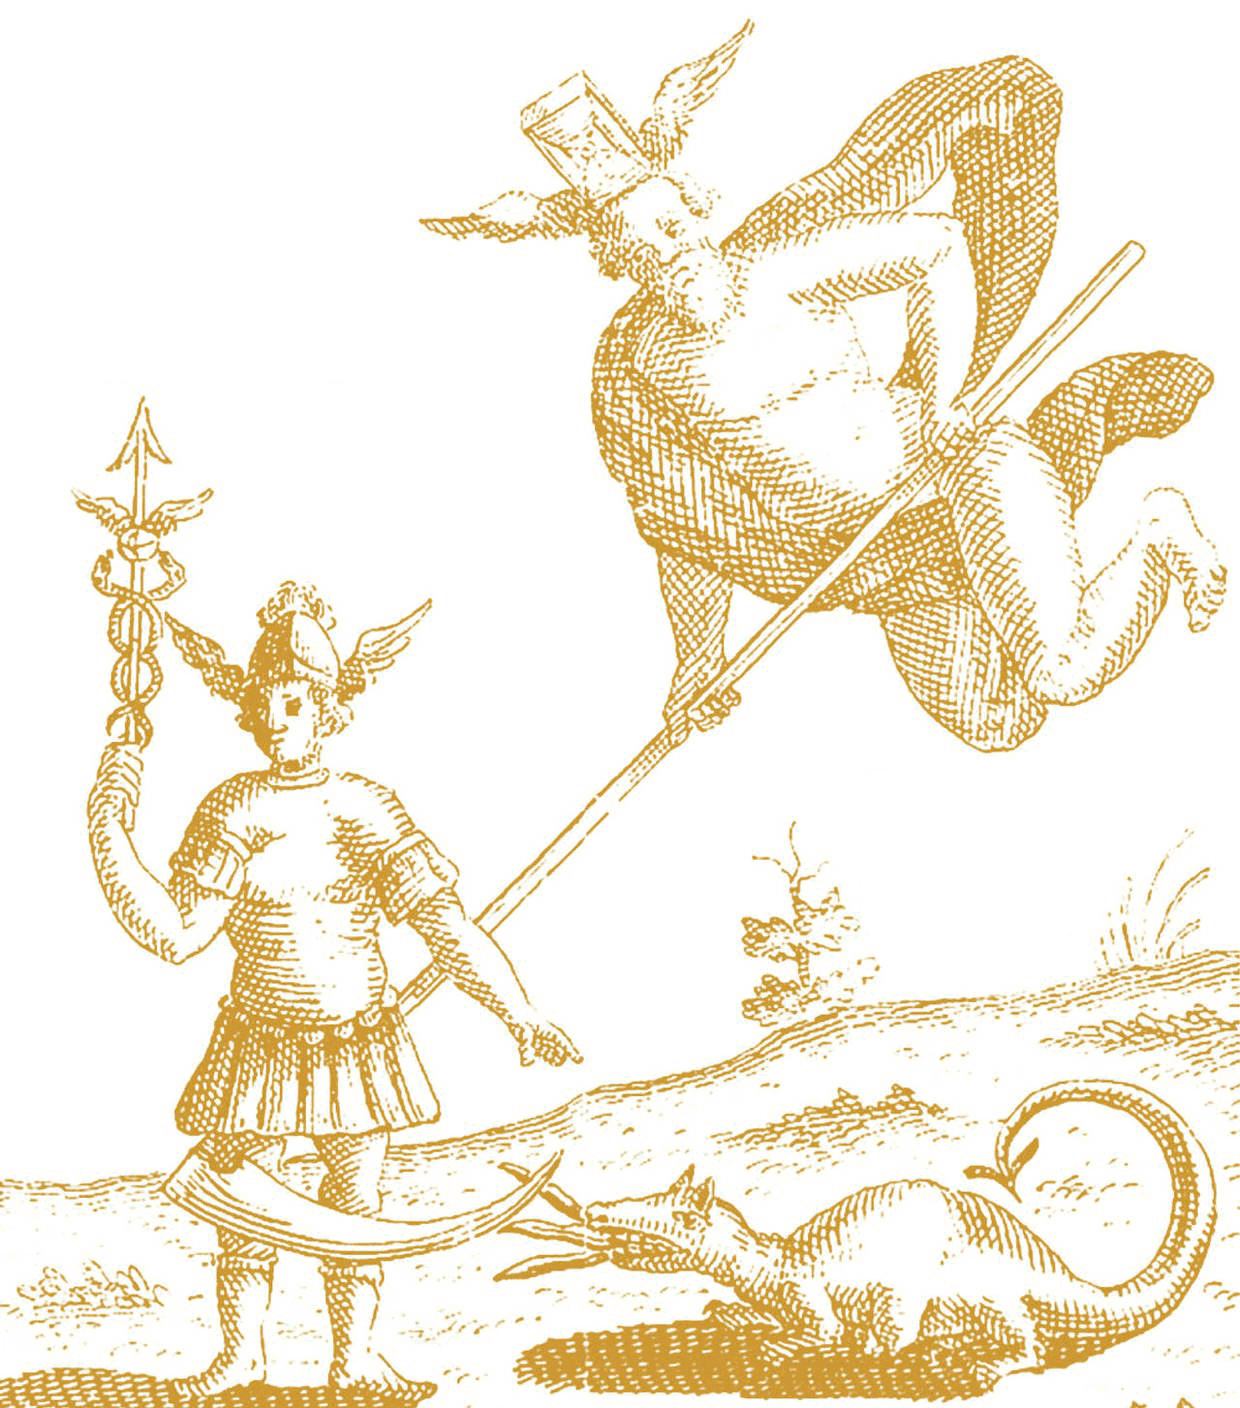 from Uraltes  chymisches  Werk: Youth or Hermes, with caduceus and wearing petasos. He is being scythed down by Death, flying and wearing a flying loop of drapery and, as a hat, a winged hourglass. A small dragon sits nearby, shooting flames from its mouth